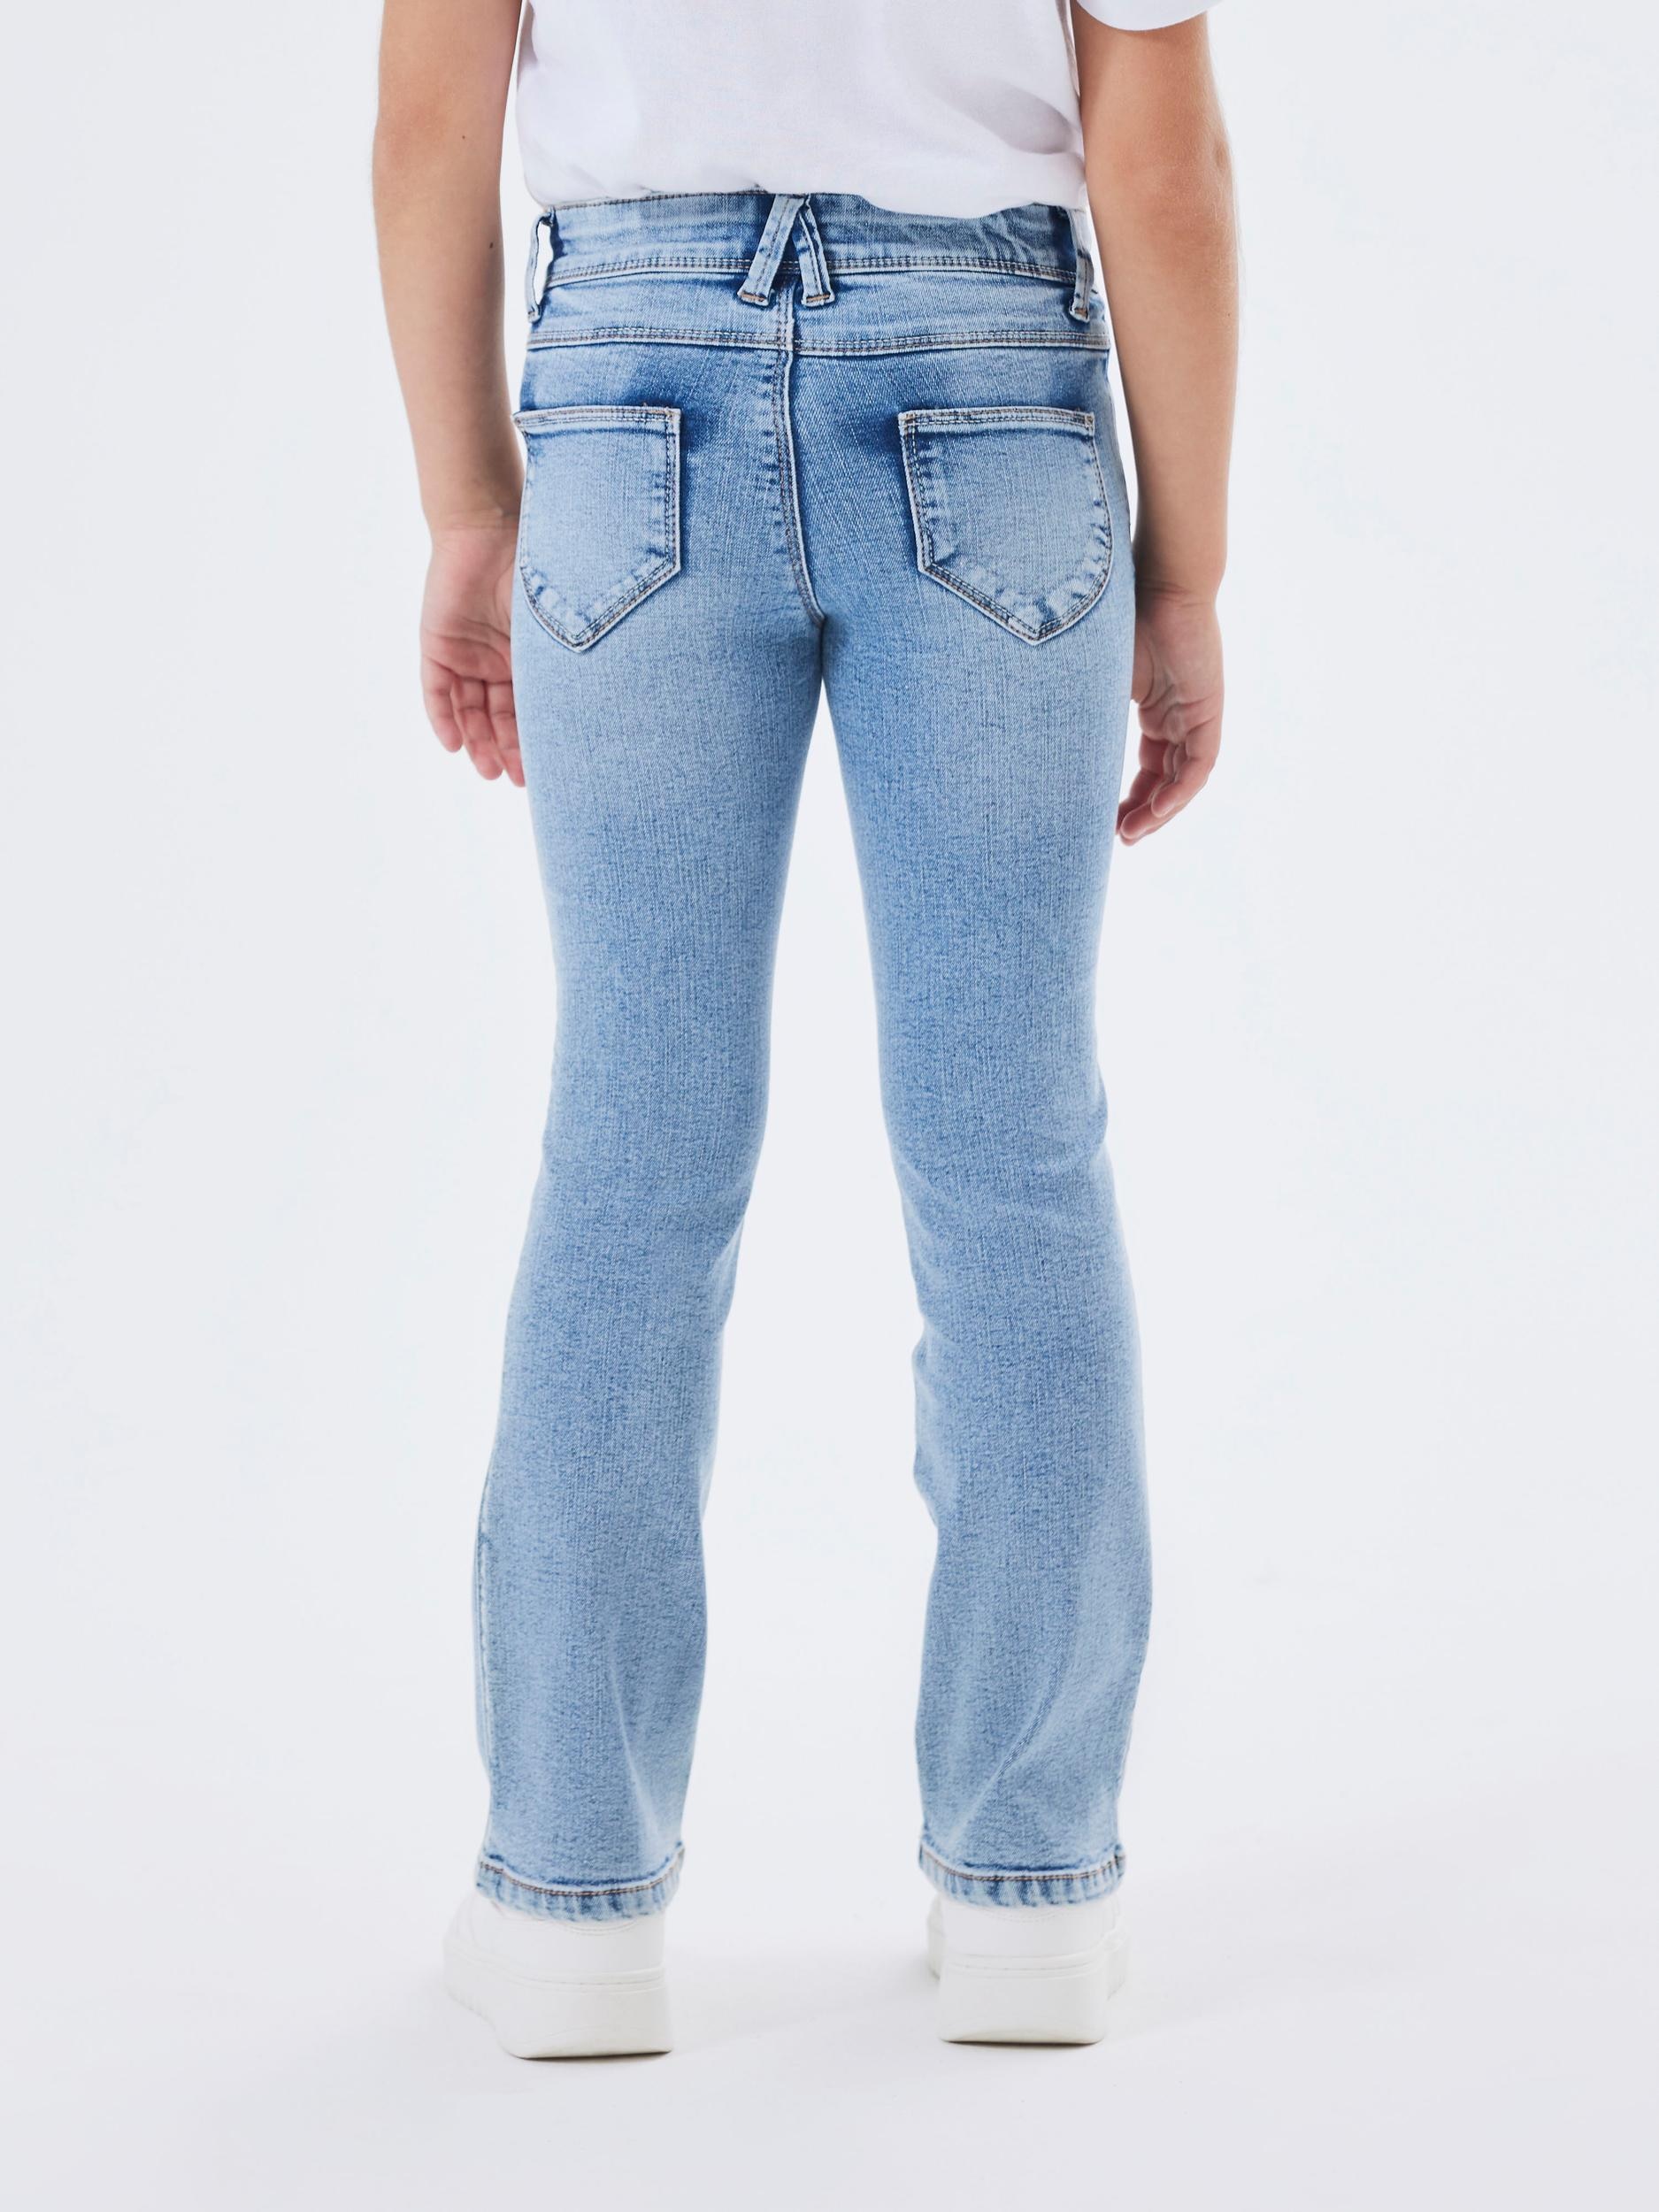 SKINNY bei BOOT OTTO Name »NKFPOLLY 1142-AU JEANS It NOOS«, kaufen Stretch Bootcut-Jeans mit